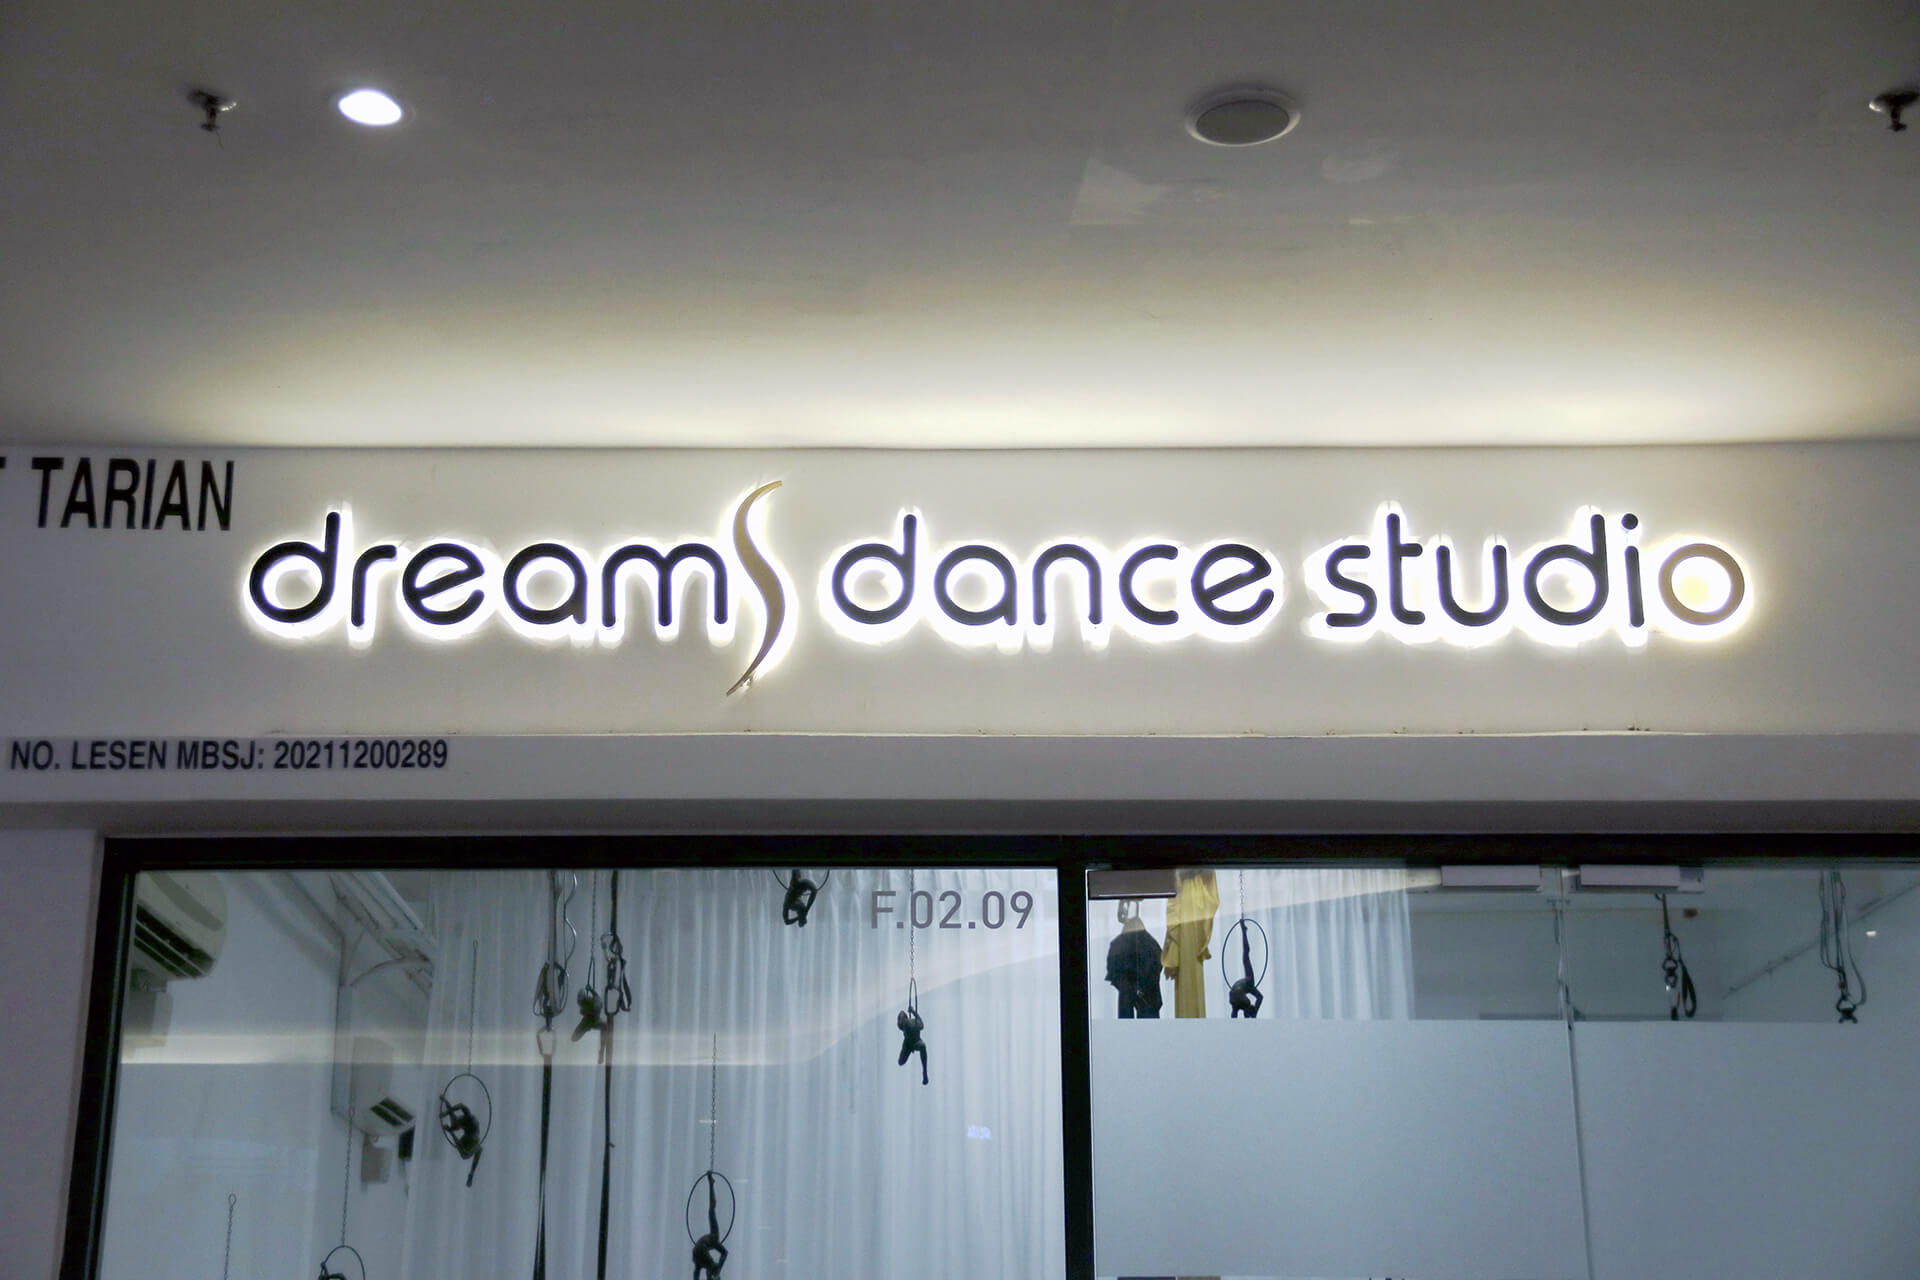 When you’re ready to defy gravity, visit Dreams Dance Studio at F-02-09, Sunway Geo Avenue!